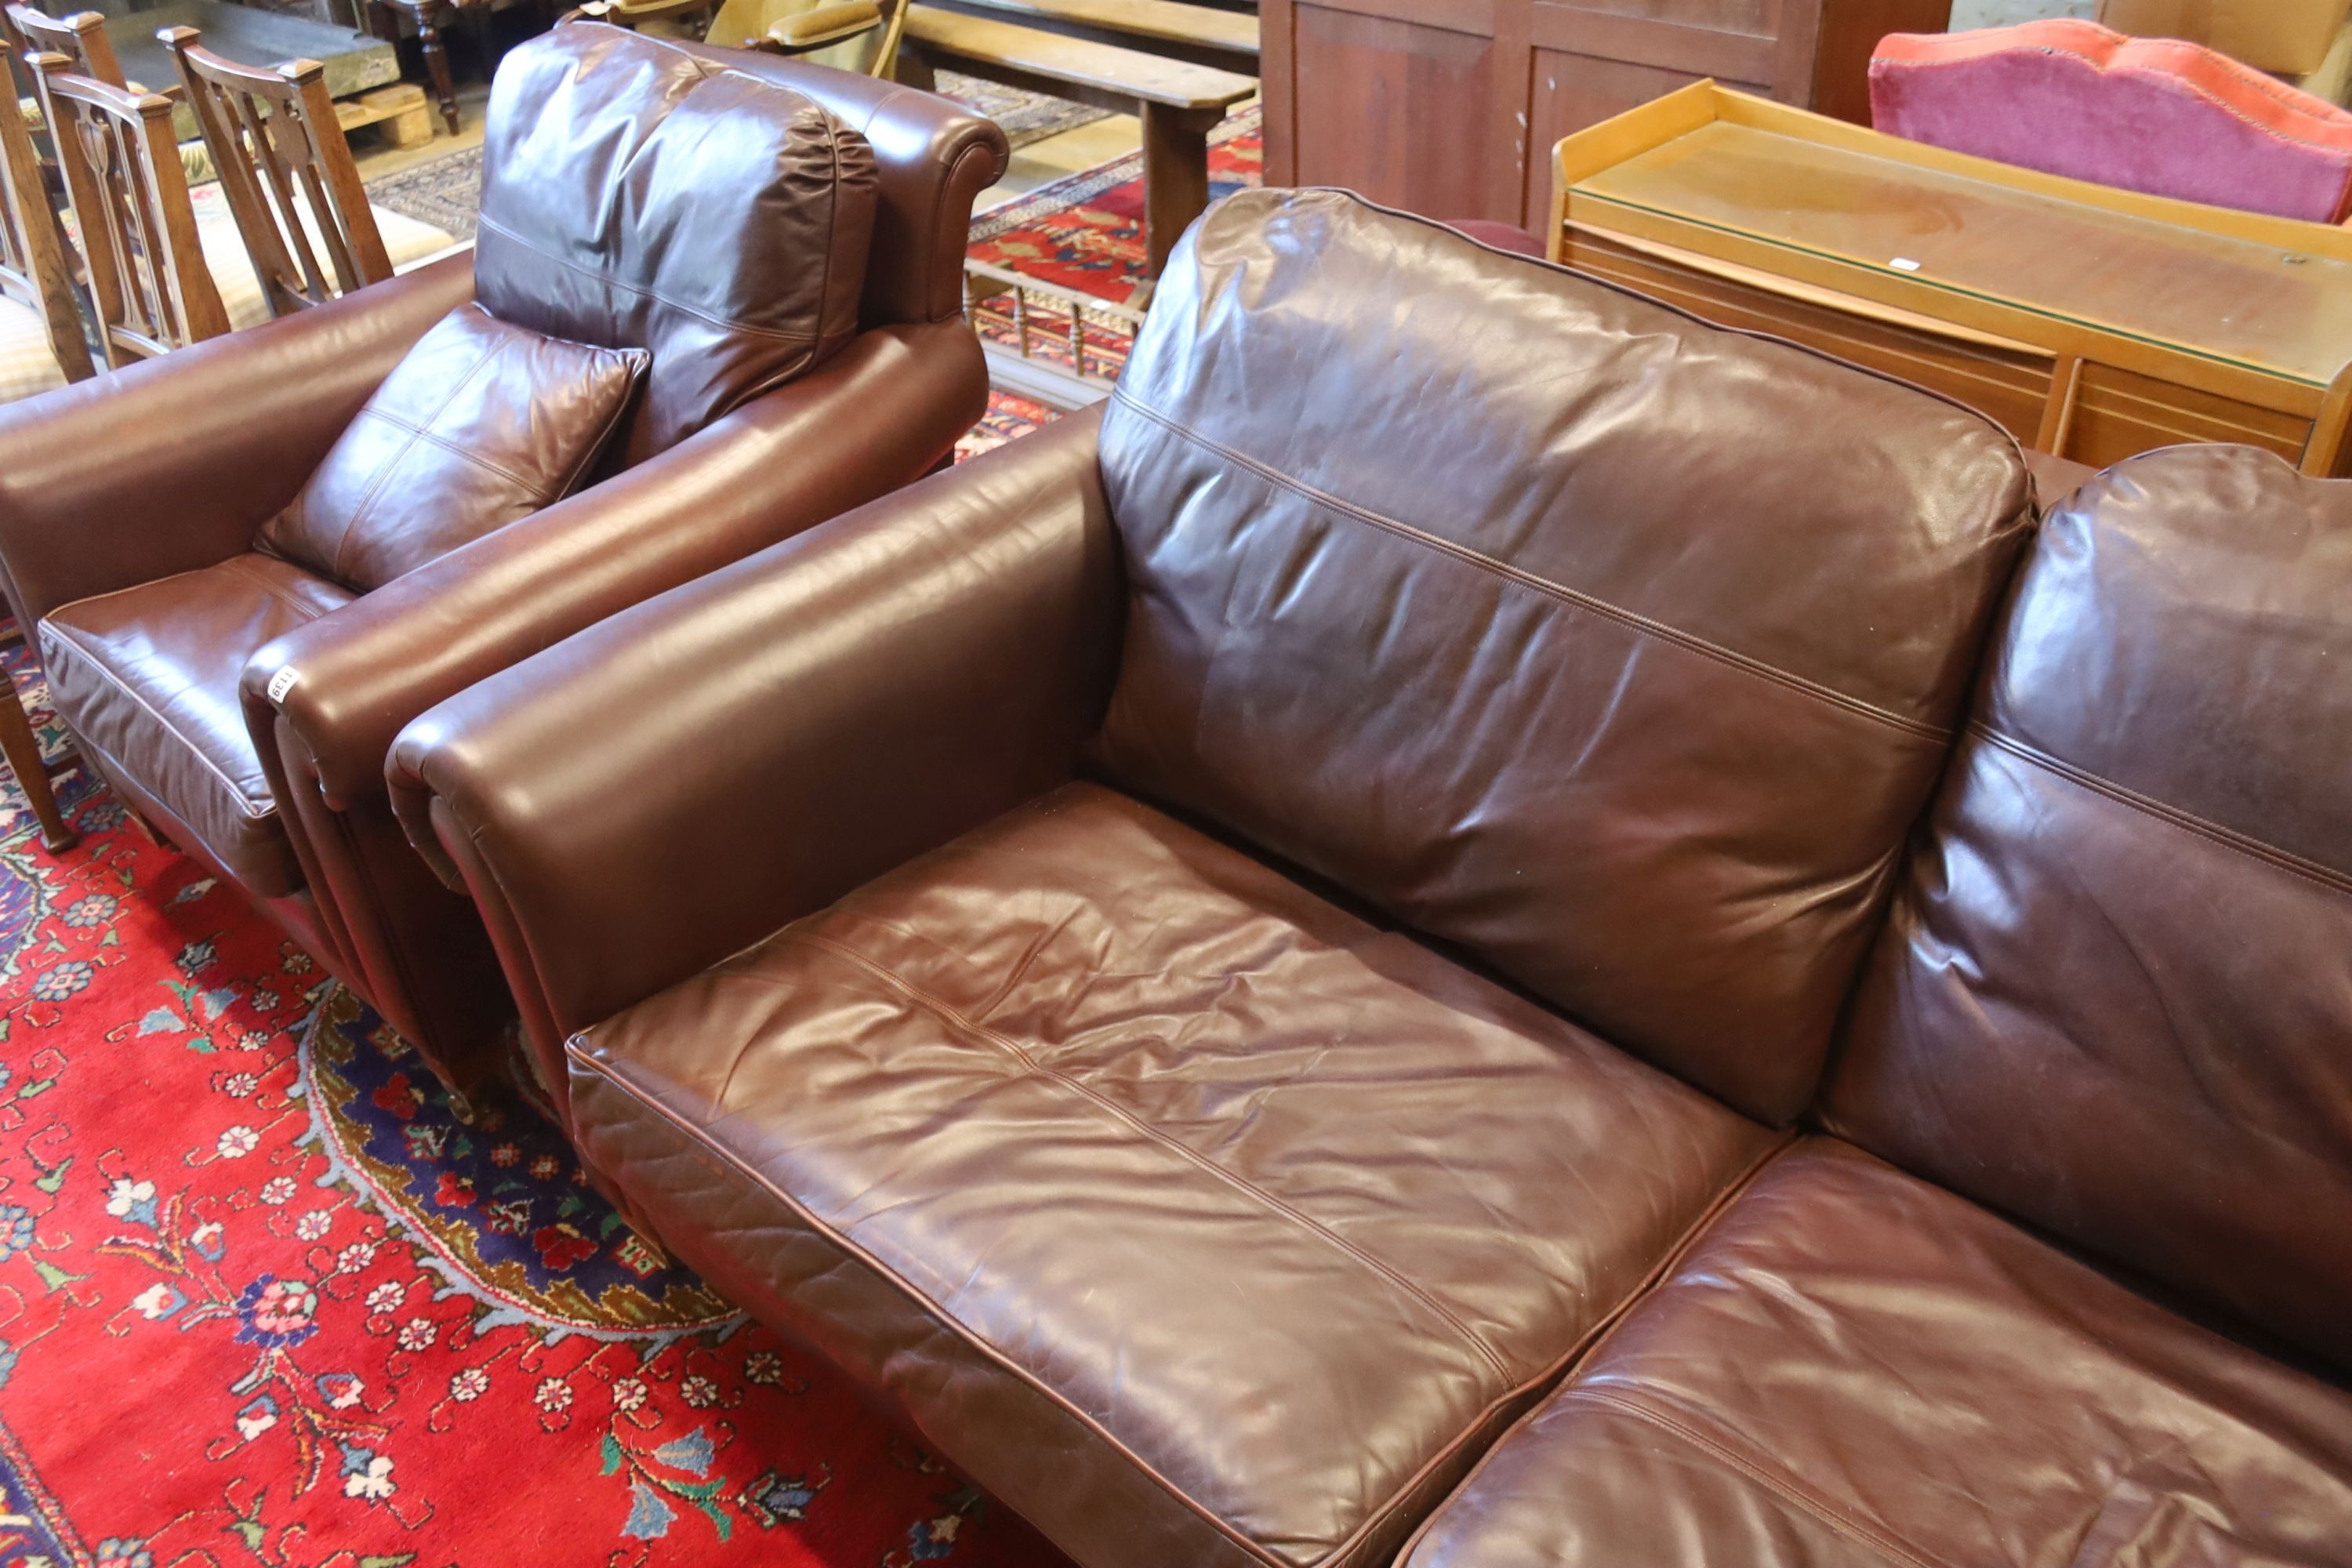 A Duresta brown leather settee and matching armchair, settee length 210cm, depth 102cm, height 90cm